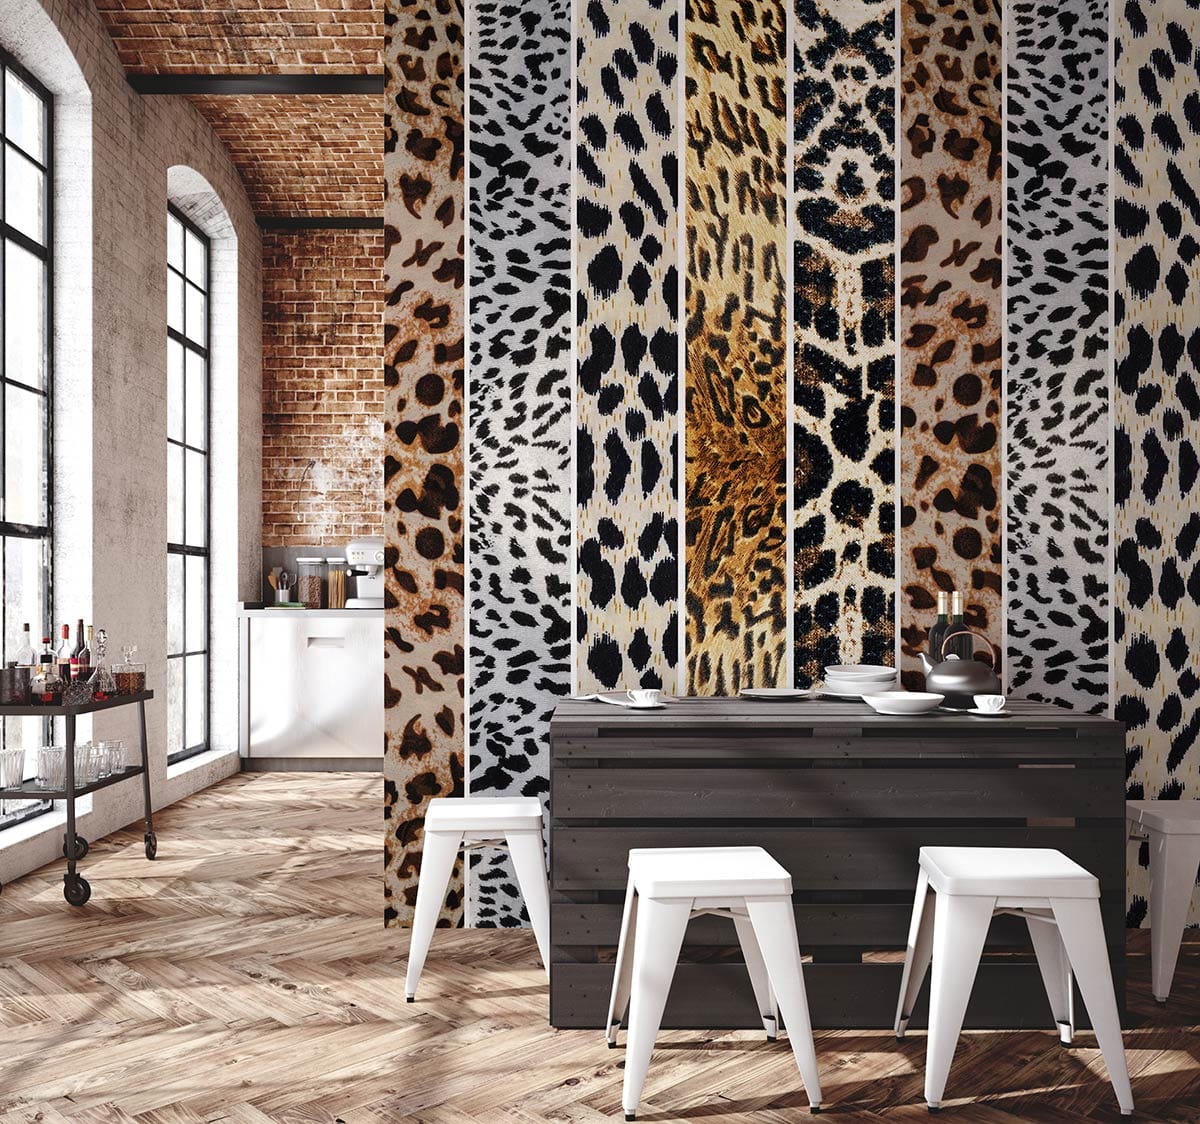 animal skin wallpaper crafted into an original work of art for the space